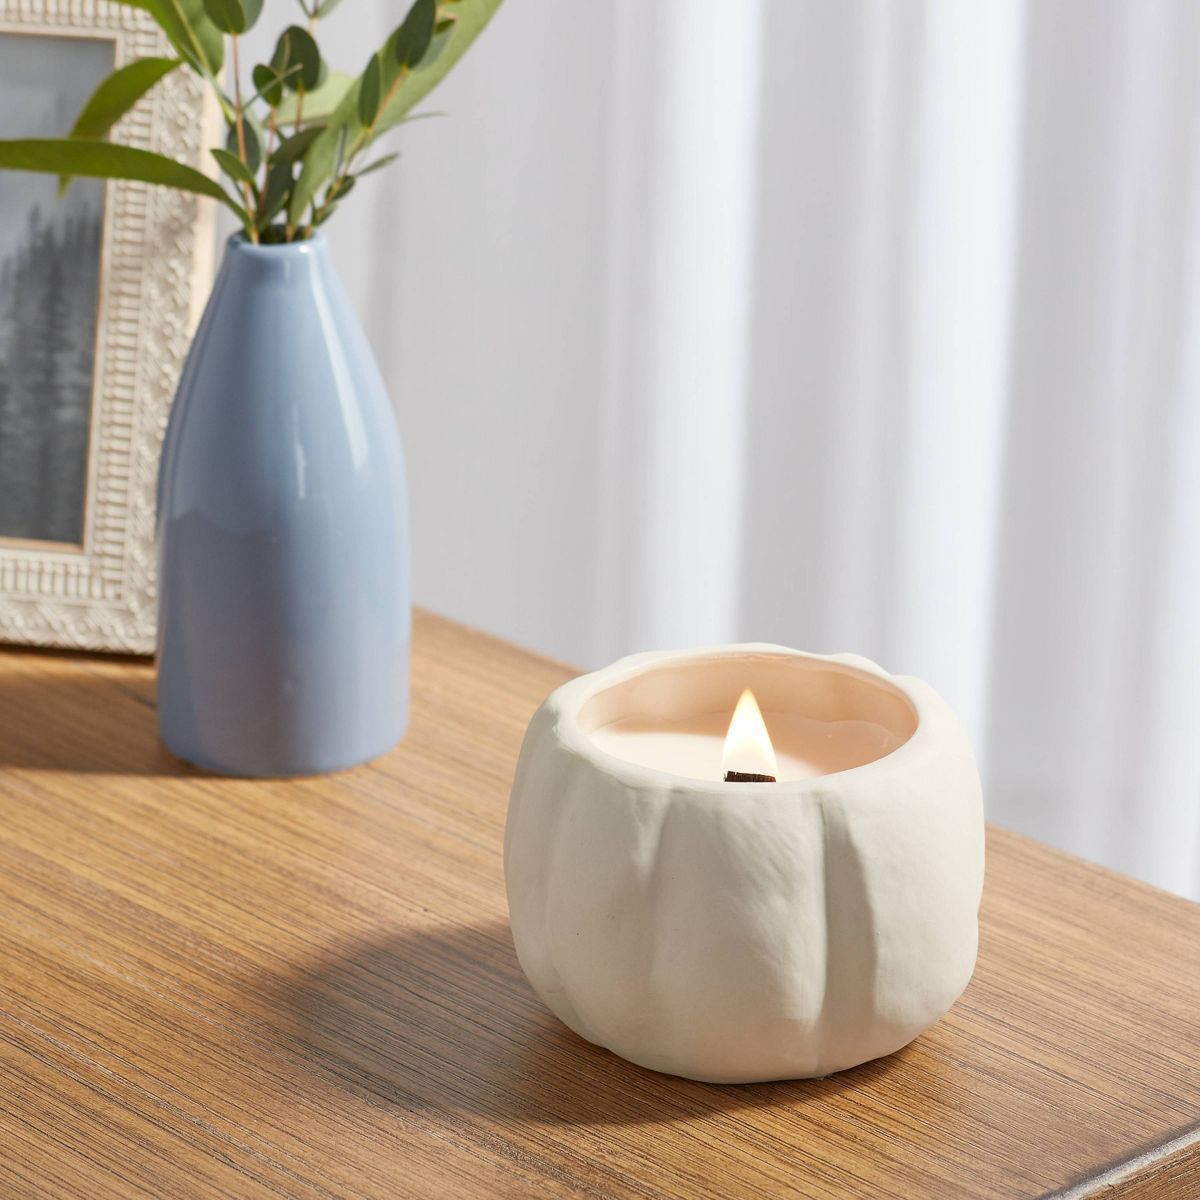 12oz Brushed Abstract Pumpkin Ceramic with Woodwick and Dustcover Honeycrisp Apple Cider Candle -... | Target